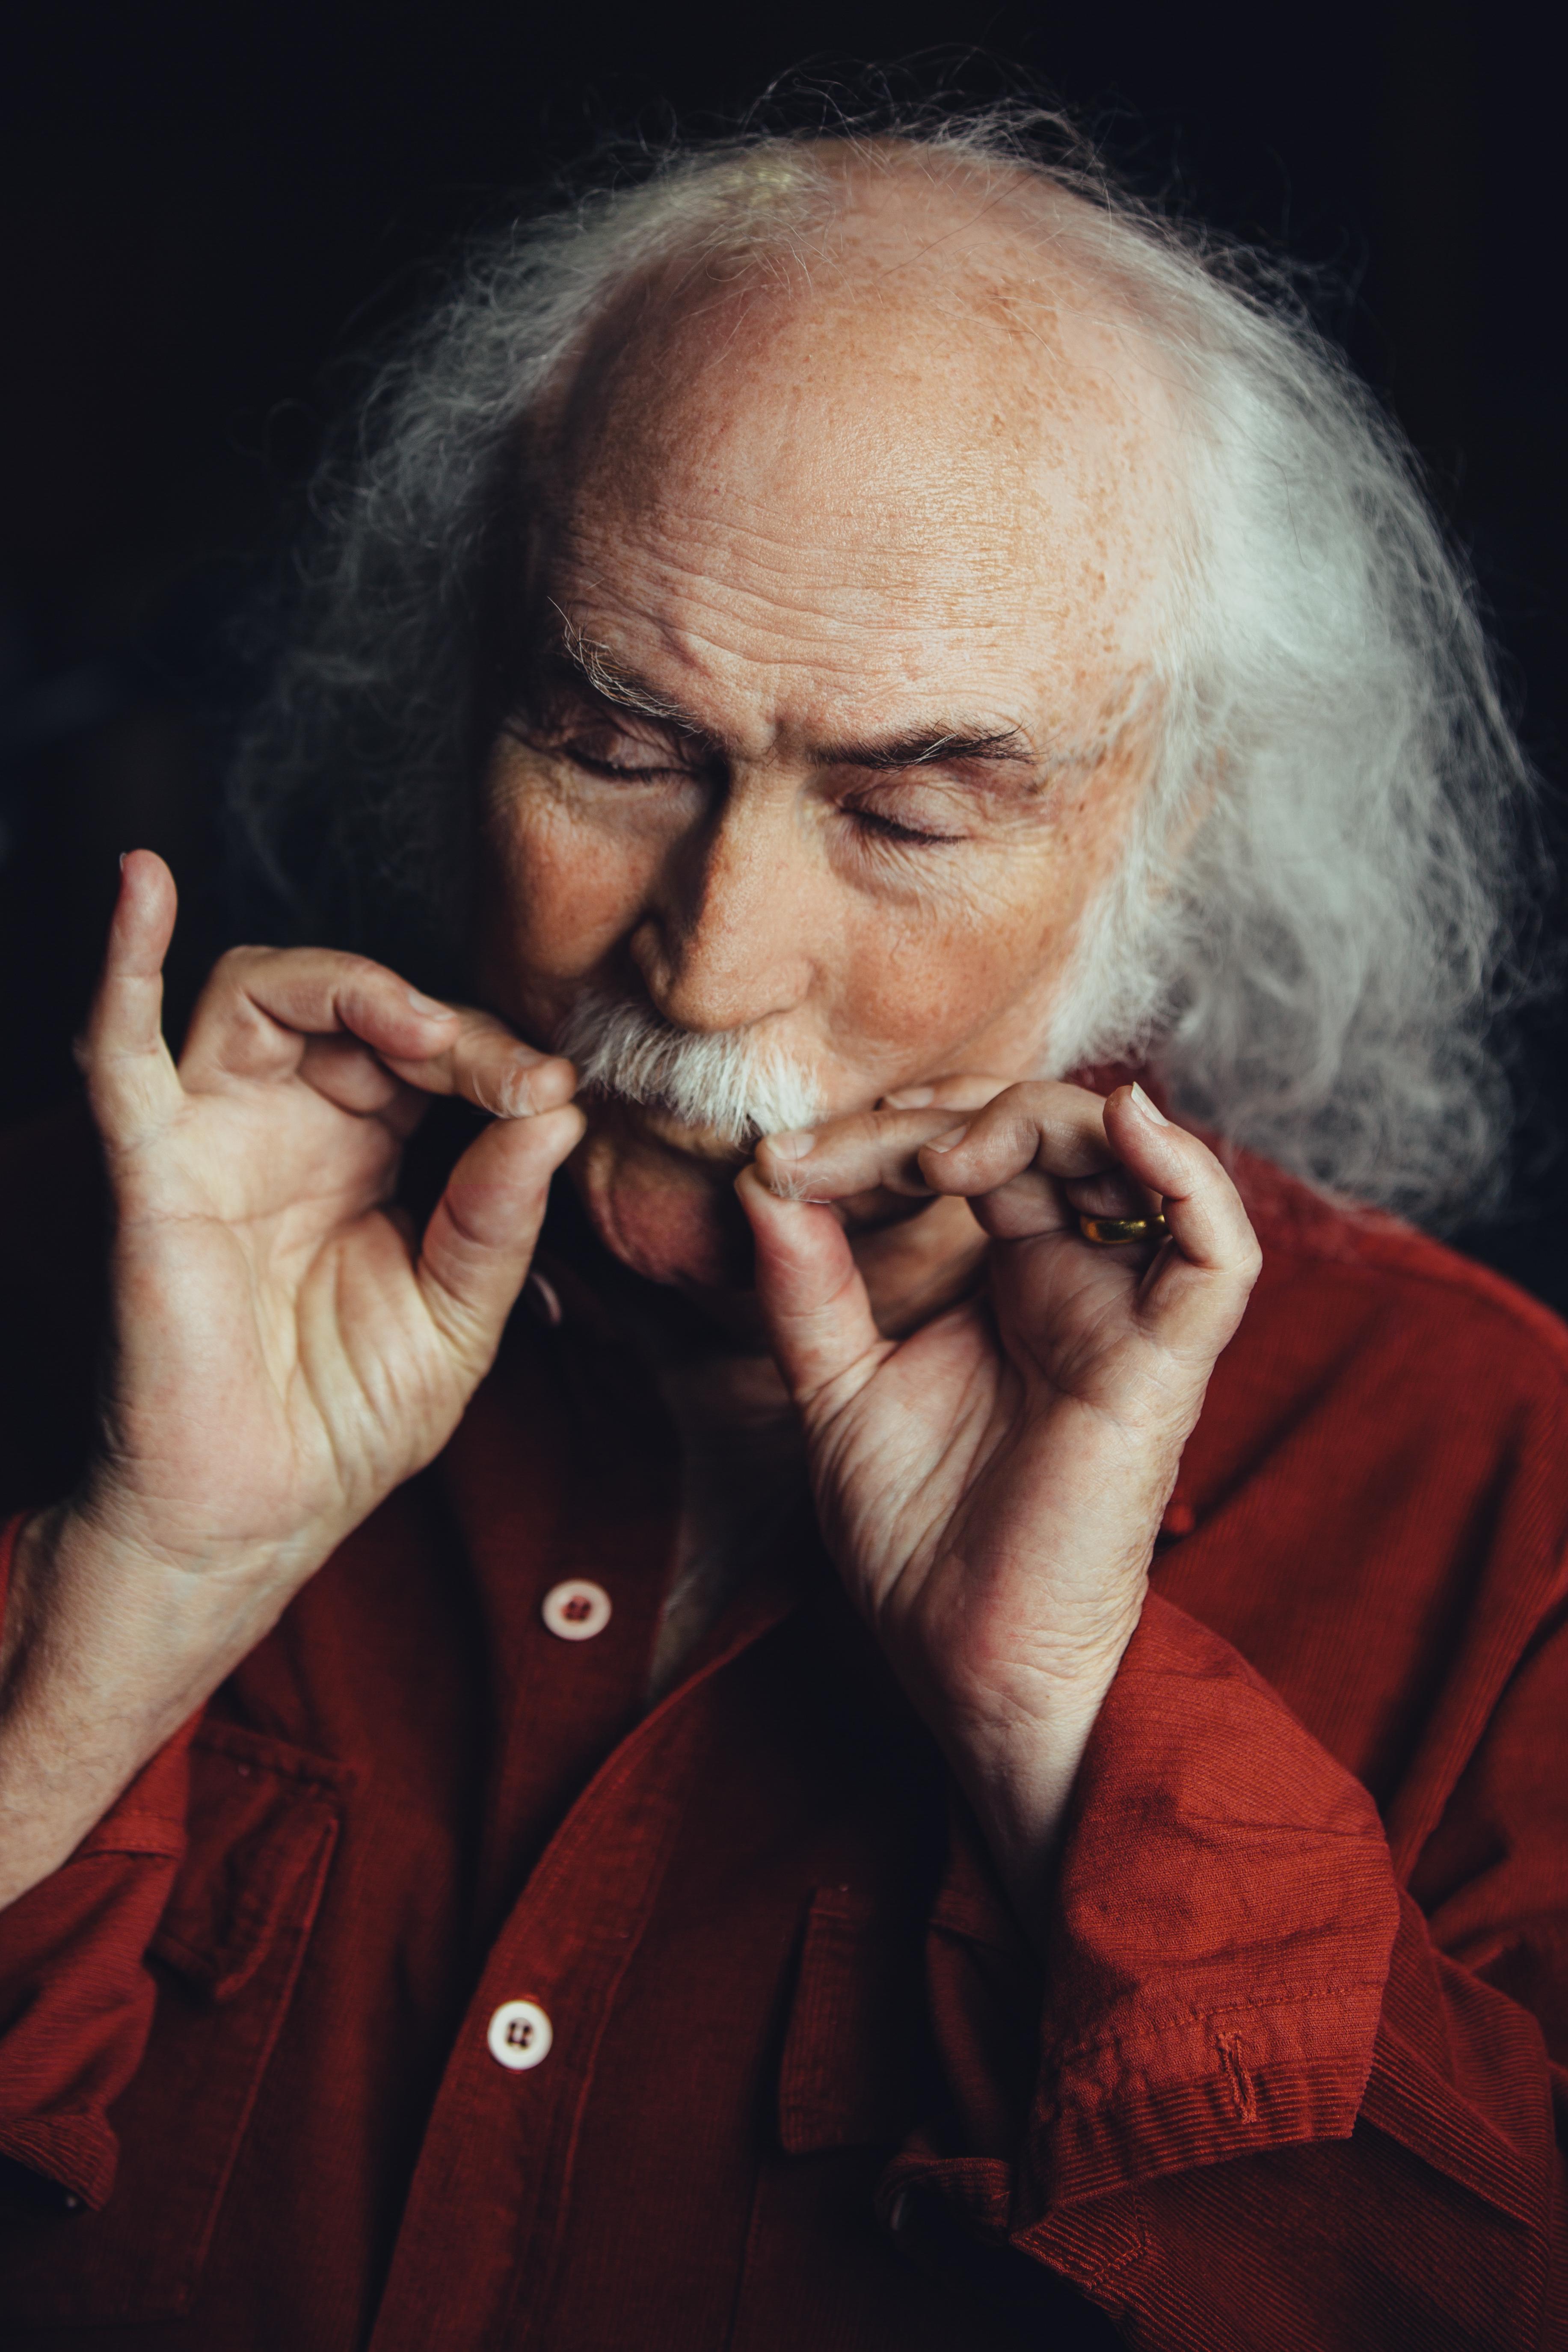 Rachael Wright Color Photograph - David Crosby, The Troubadour, Los Angeles, CA, Music Photography, Signed